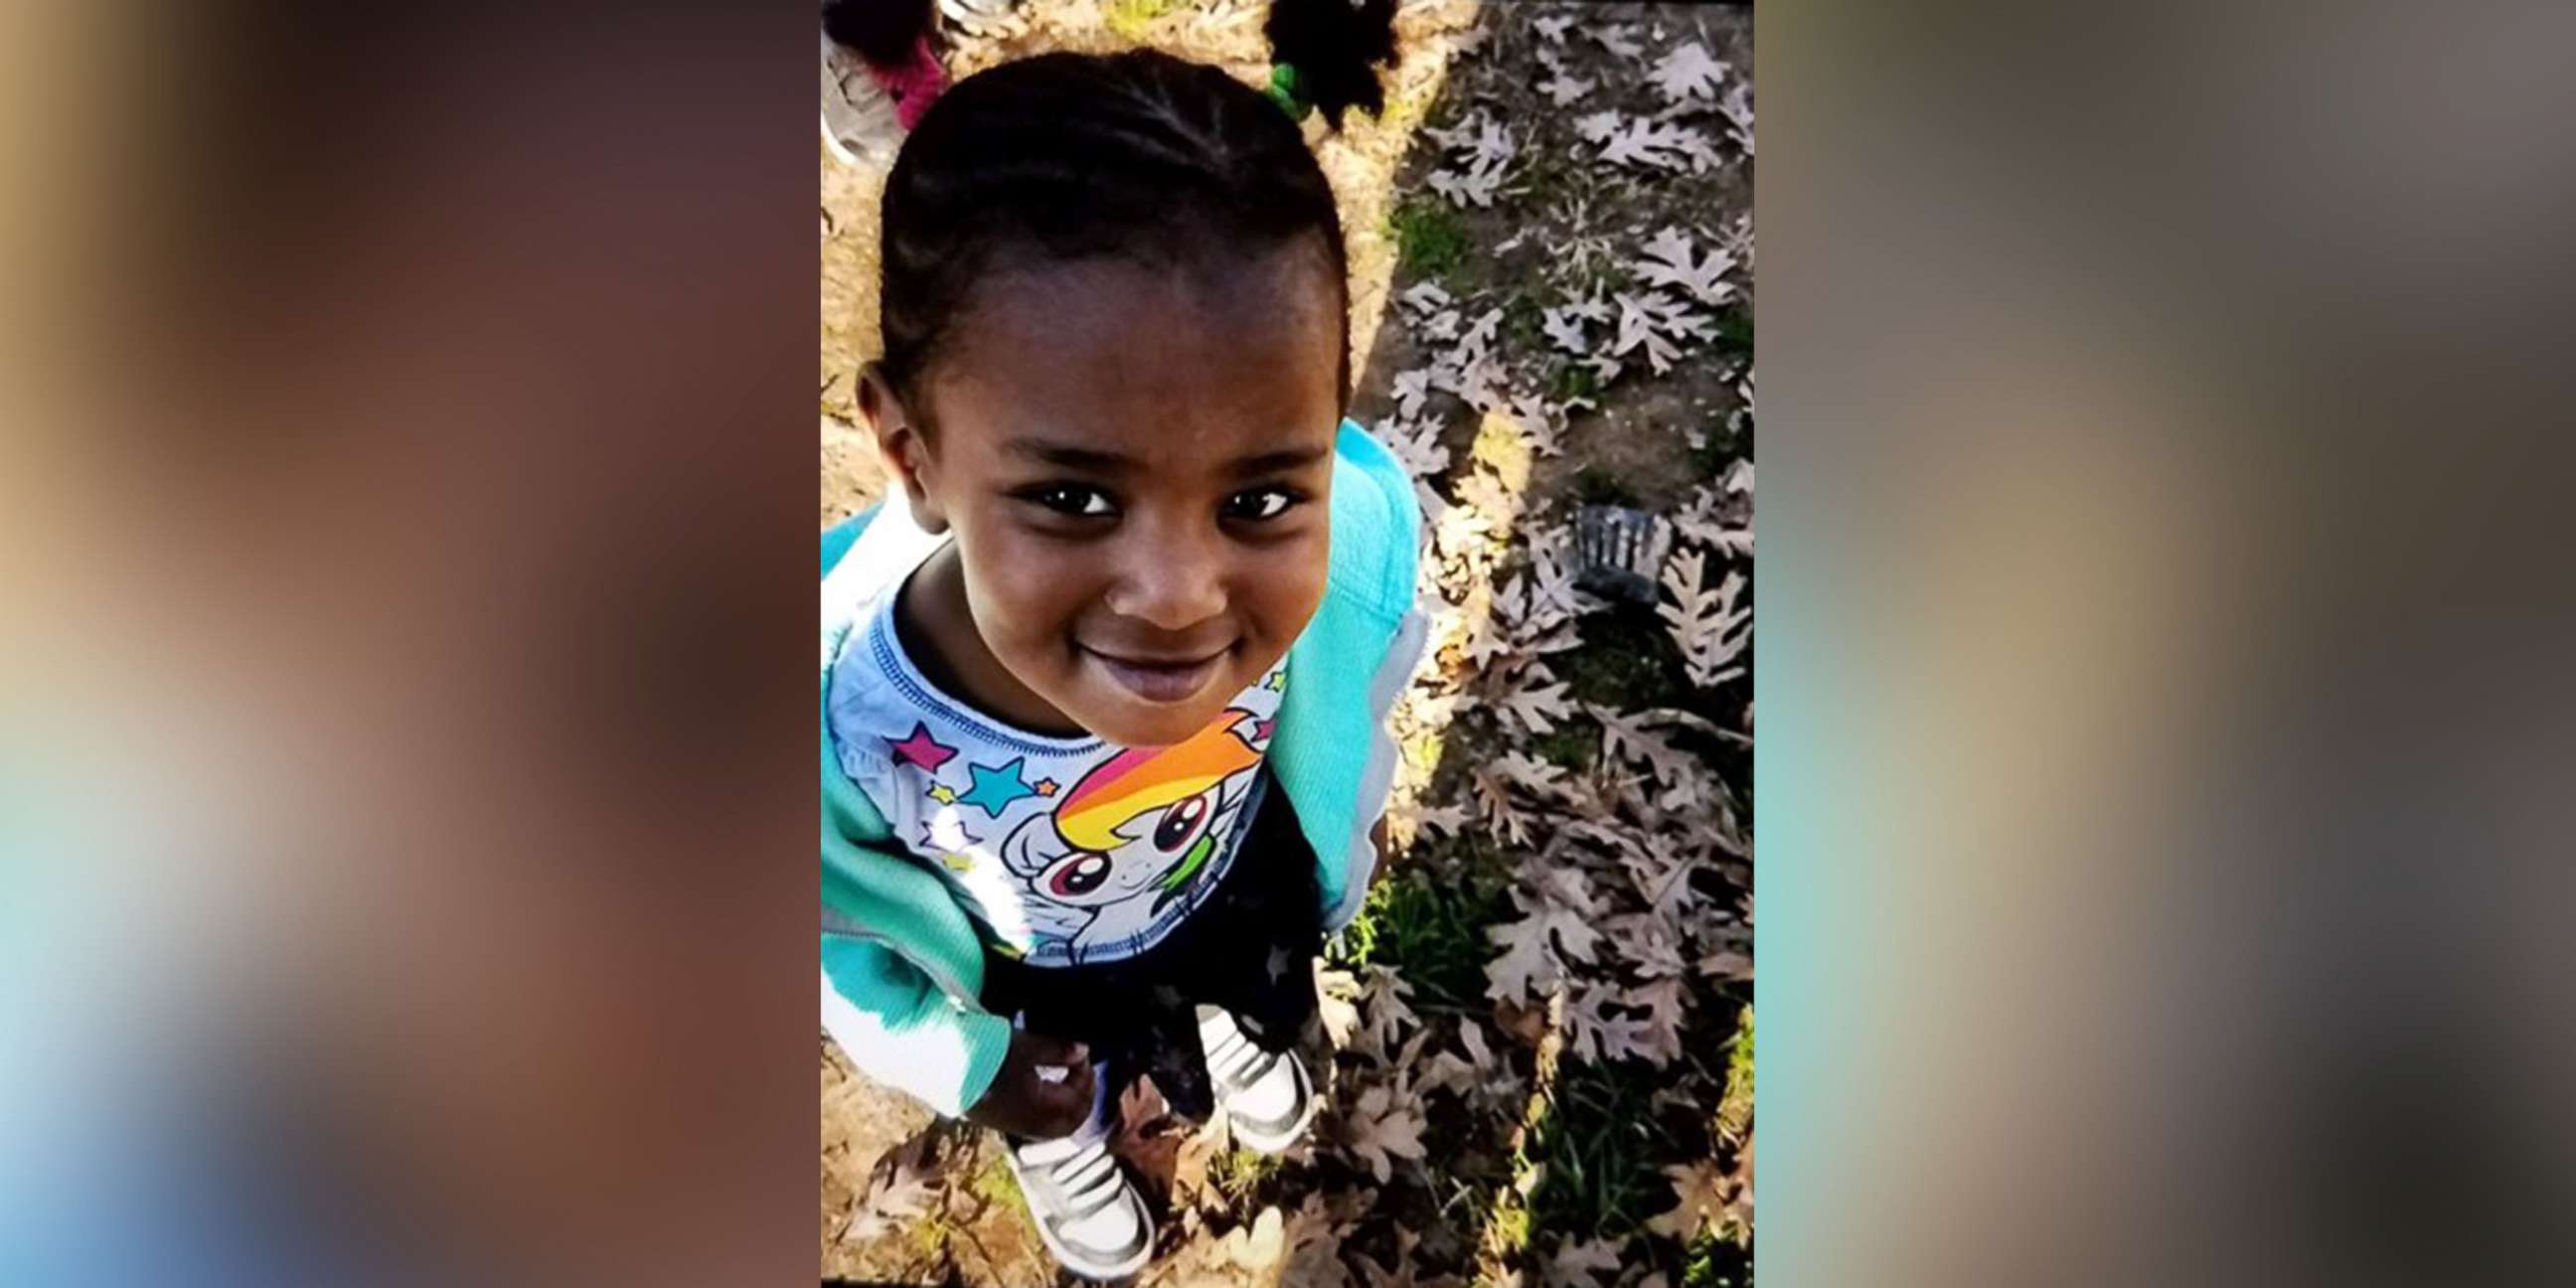 PHOTO: Police in Greensboro, N.C., have issued an amber alert for Ahlora Lindiment, last seen wearing a short sleeve pink t-shirt, black jeans and possibly white sandals on Oct. 9, 2019.